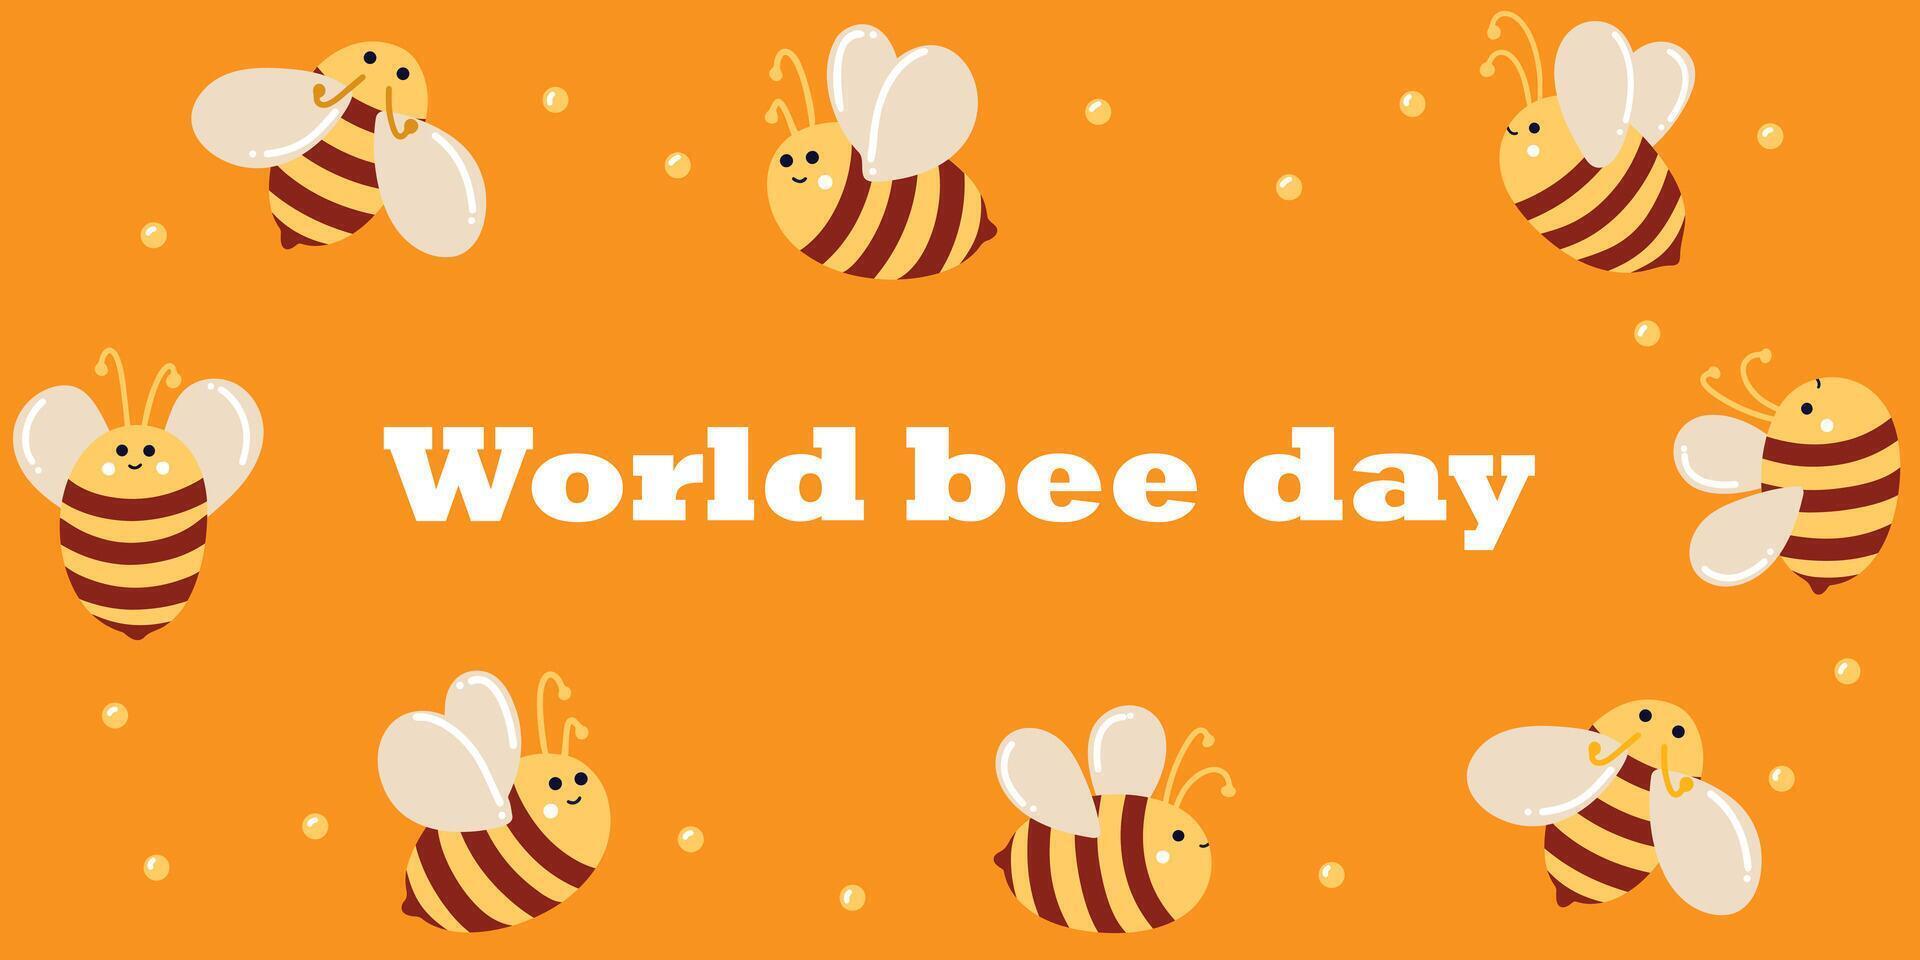 World beer day of 20 may. Banner with cute honey bees in flat-lay style for web use, printing, banners, backgrounds. Celebrating World Bee Day and caring for bees. Beekeeping and animal care vector